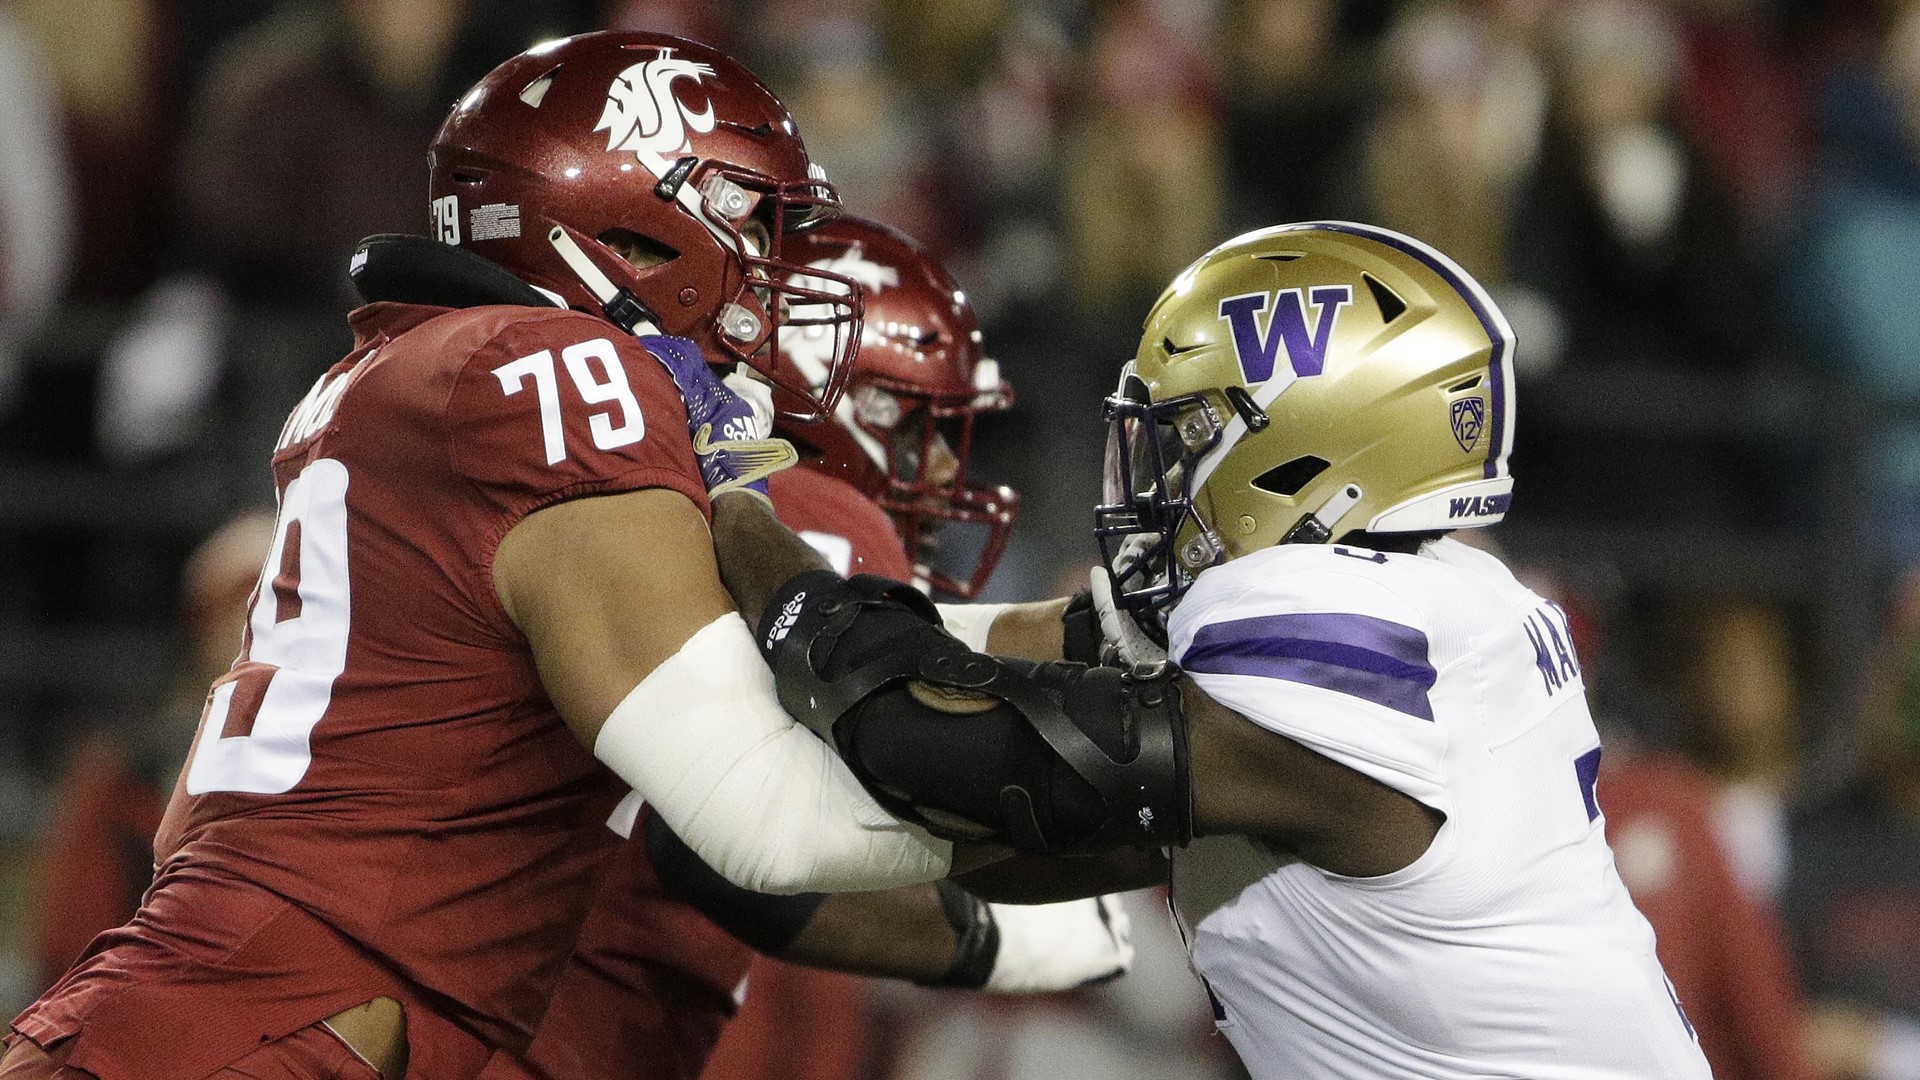 Apple Cup will continue for 5 more years